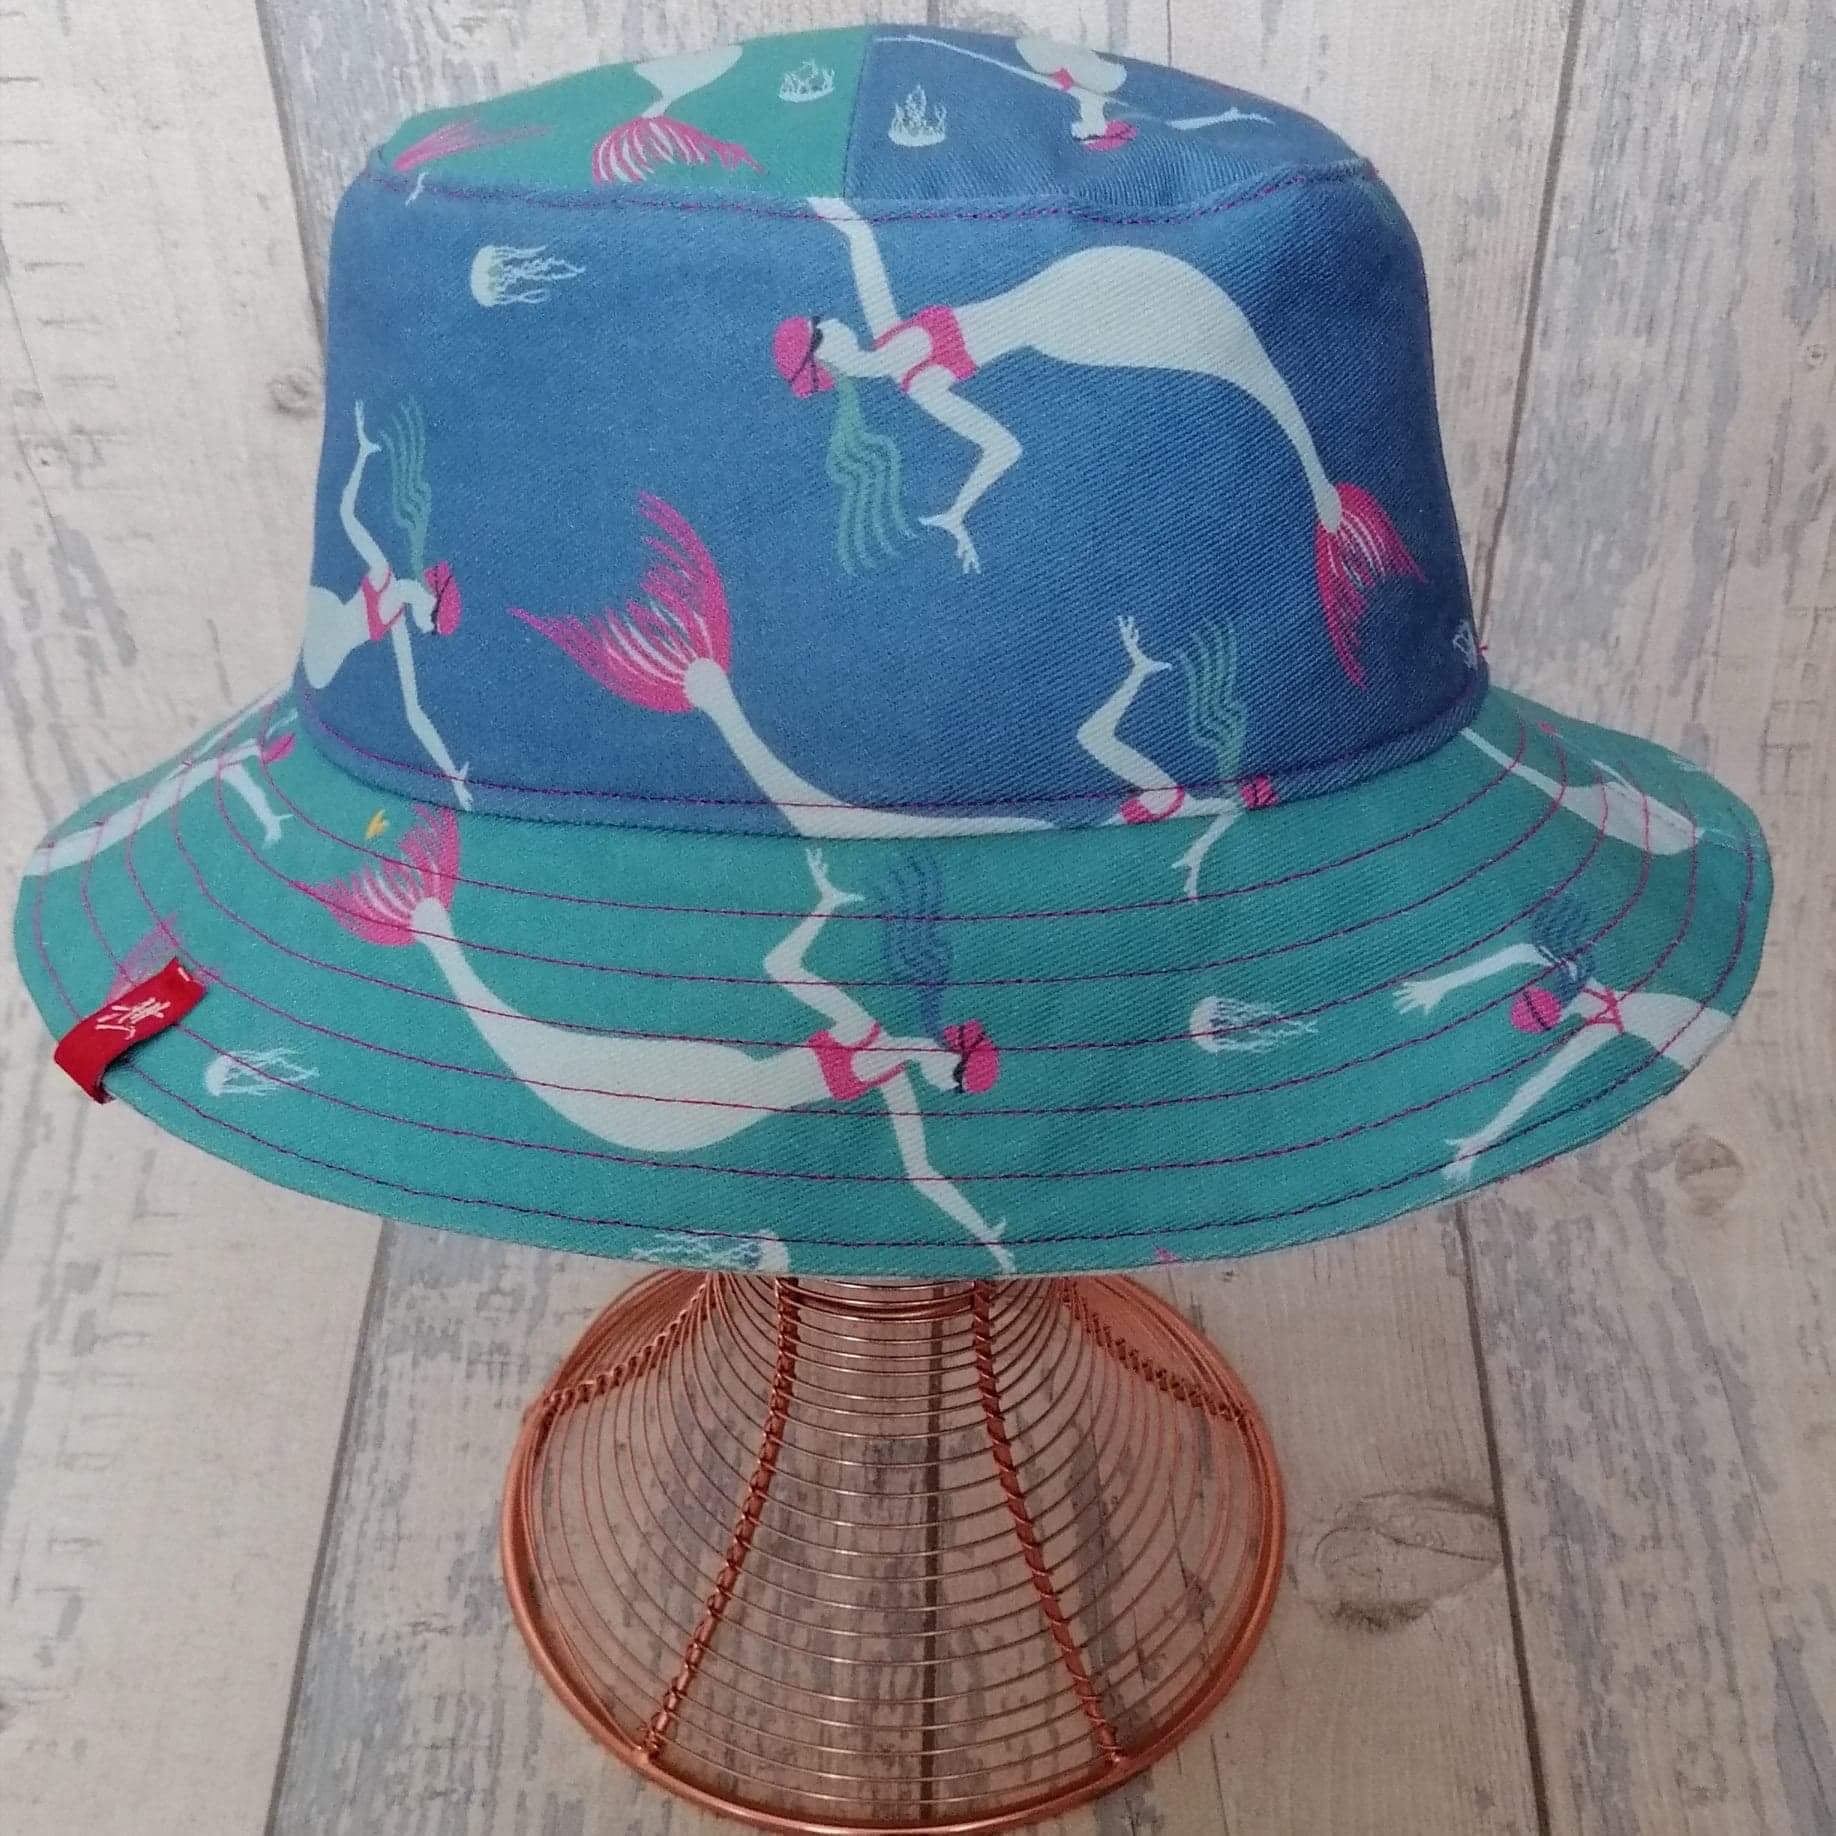 Reversible festival bucket hat. Blue and turquoise Swimming Mermaid design with half-and-half crown